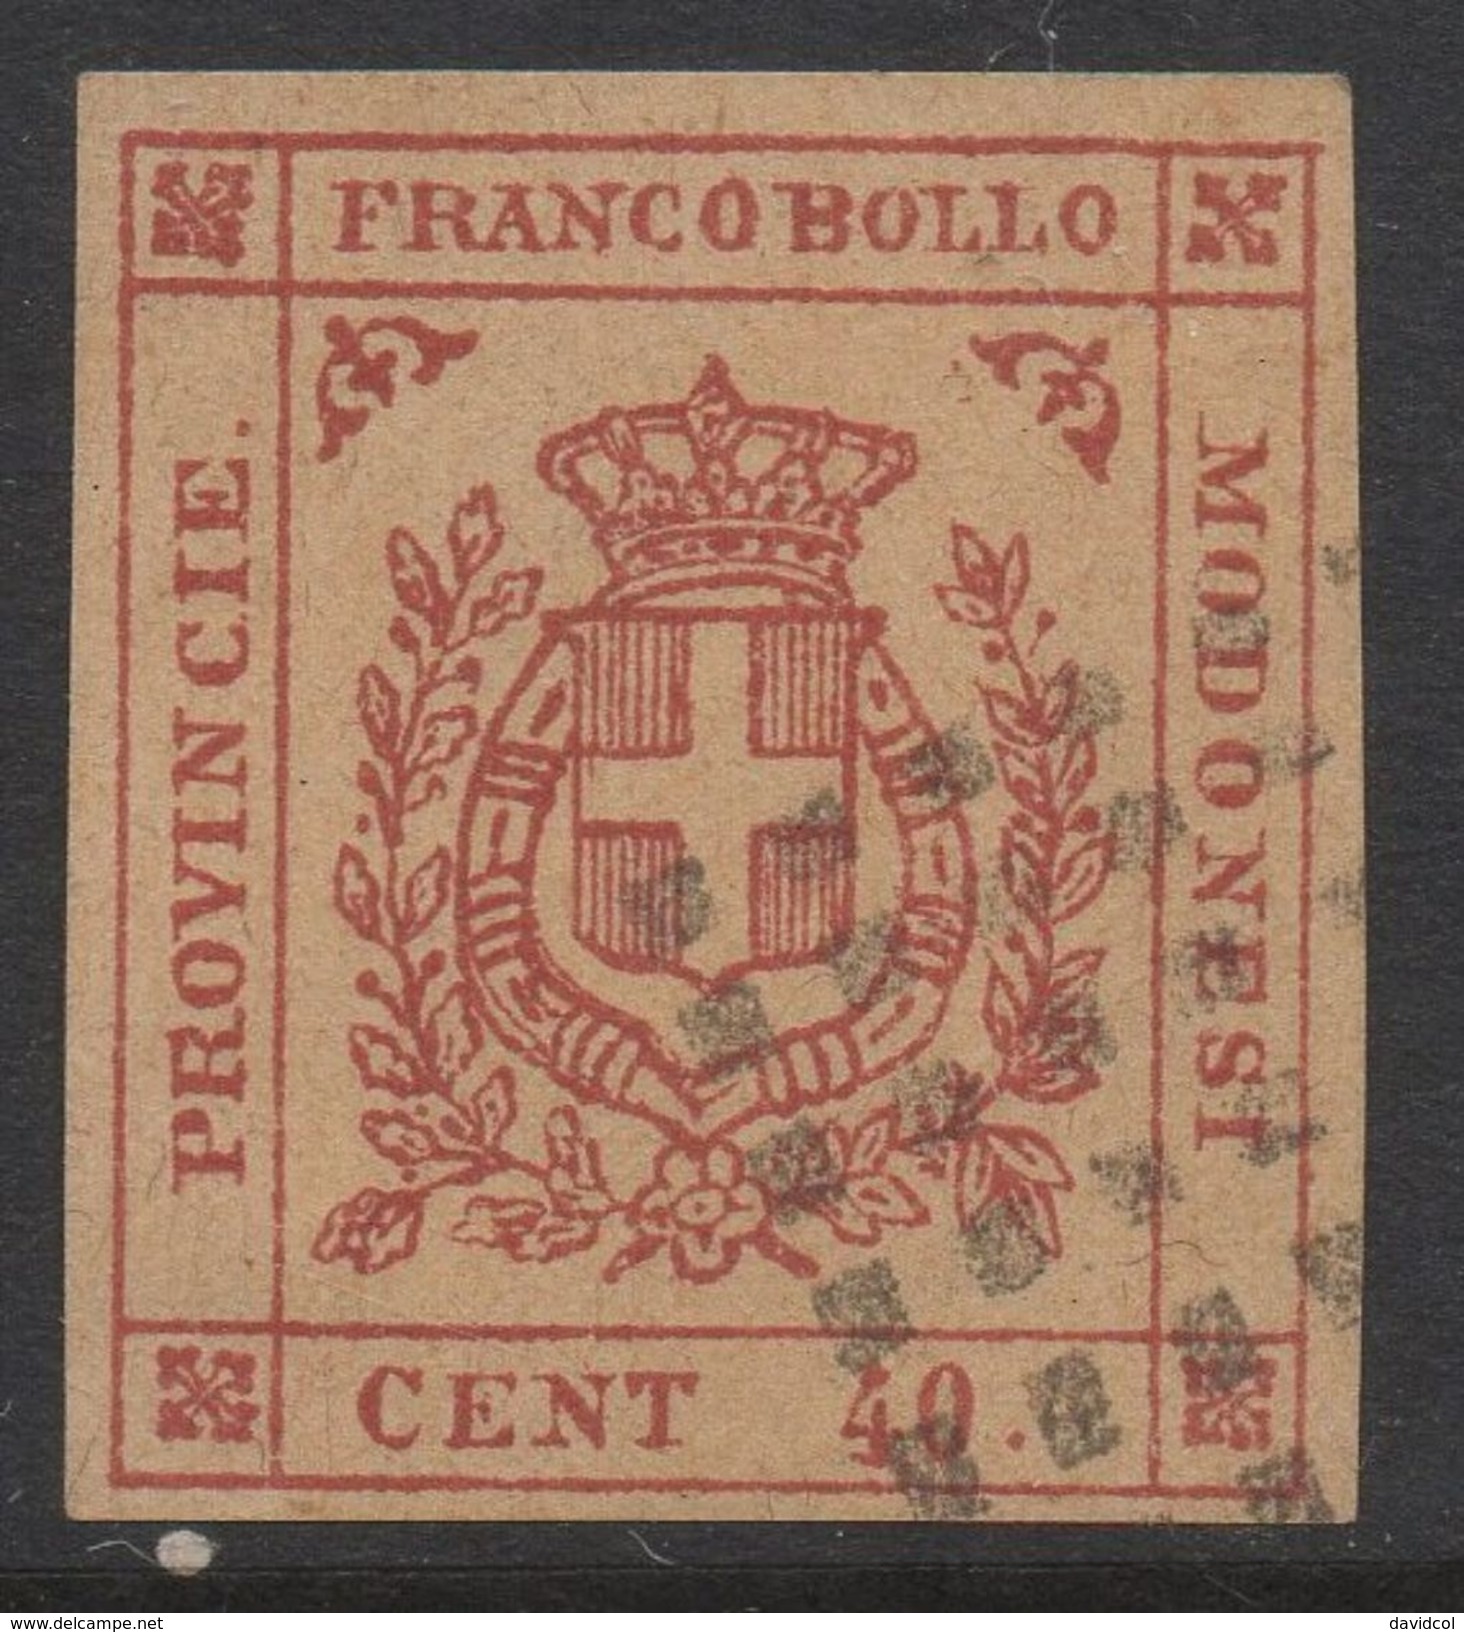 R259.-. MODENA .- .PROVISIONAL GOVERNMENT. SC#: 13 - USED. SCV: US$950.00++. Forgery, Reprint ??? - Modena